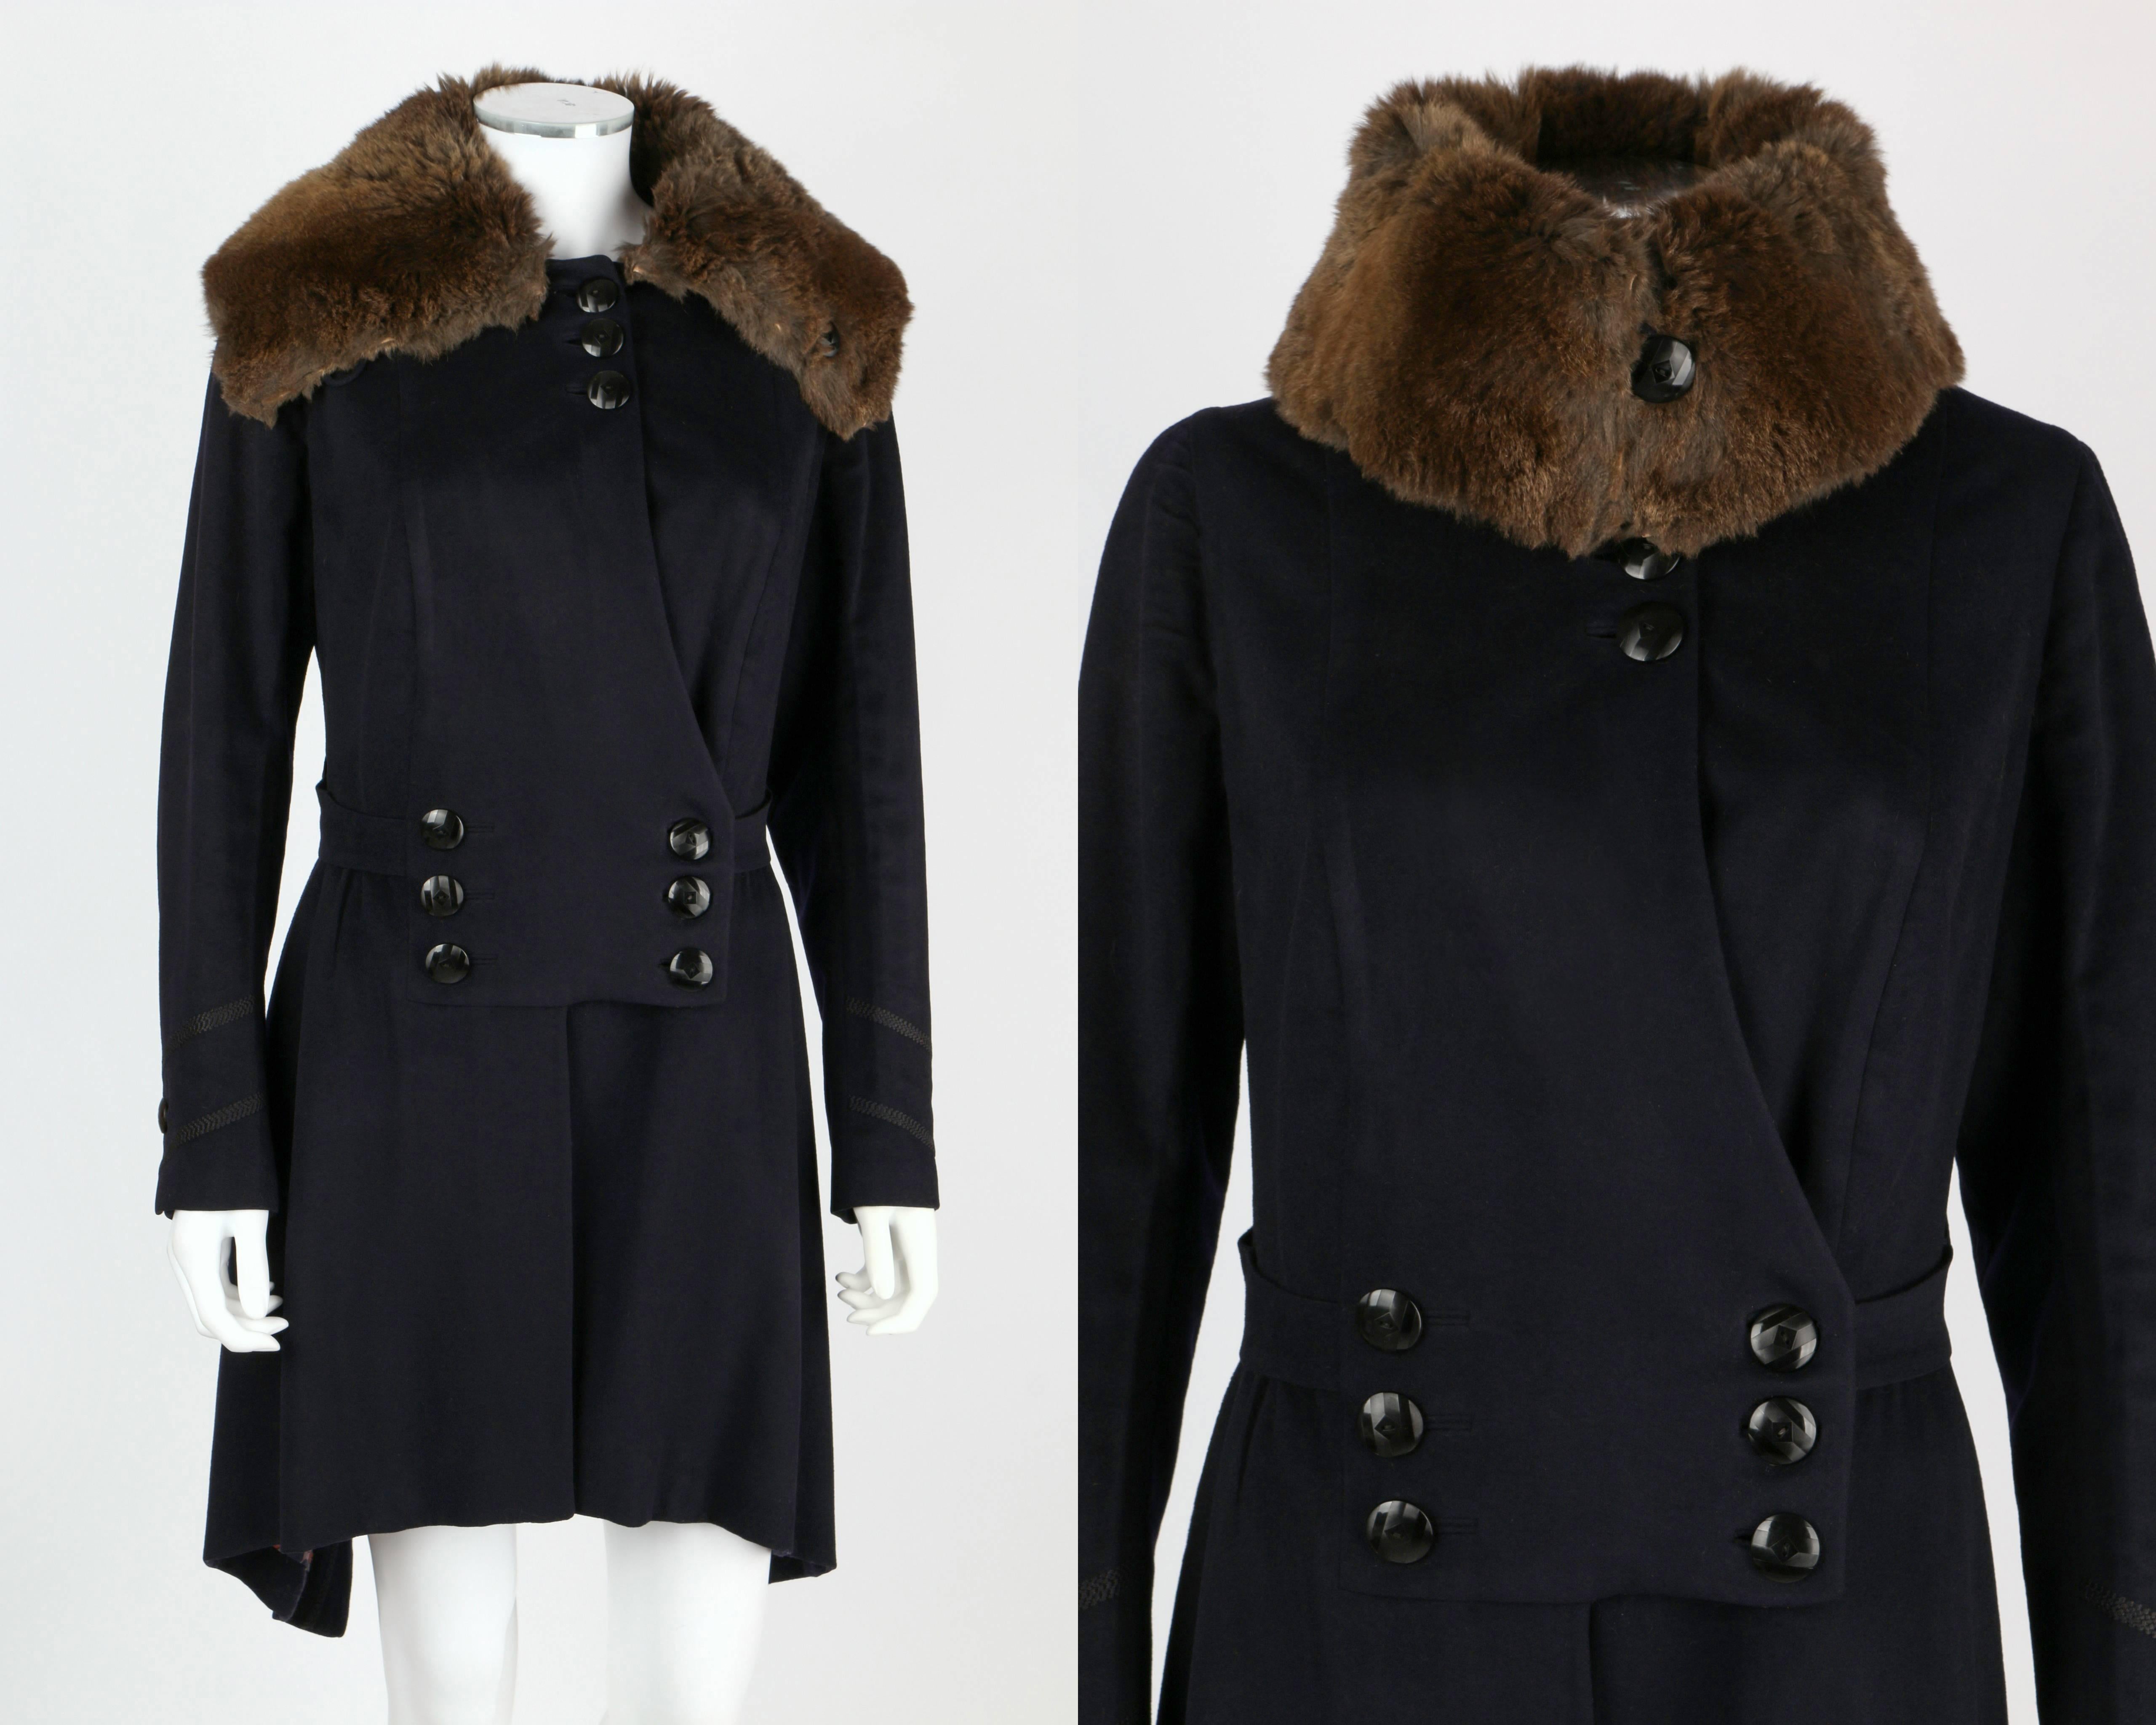 Couture c.1910's navy blue wool coat. Military inspired trim. Double breasted button front with cut away detail. Panel detail at sides. Large fur collar. Lined in purple, navy and coral polka dot silk. Please note that this item was pinned to better